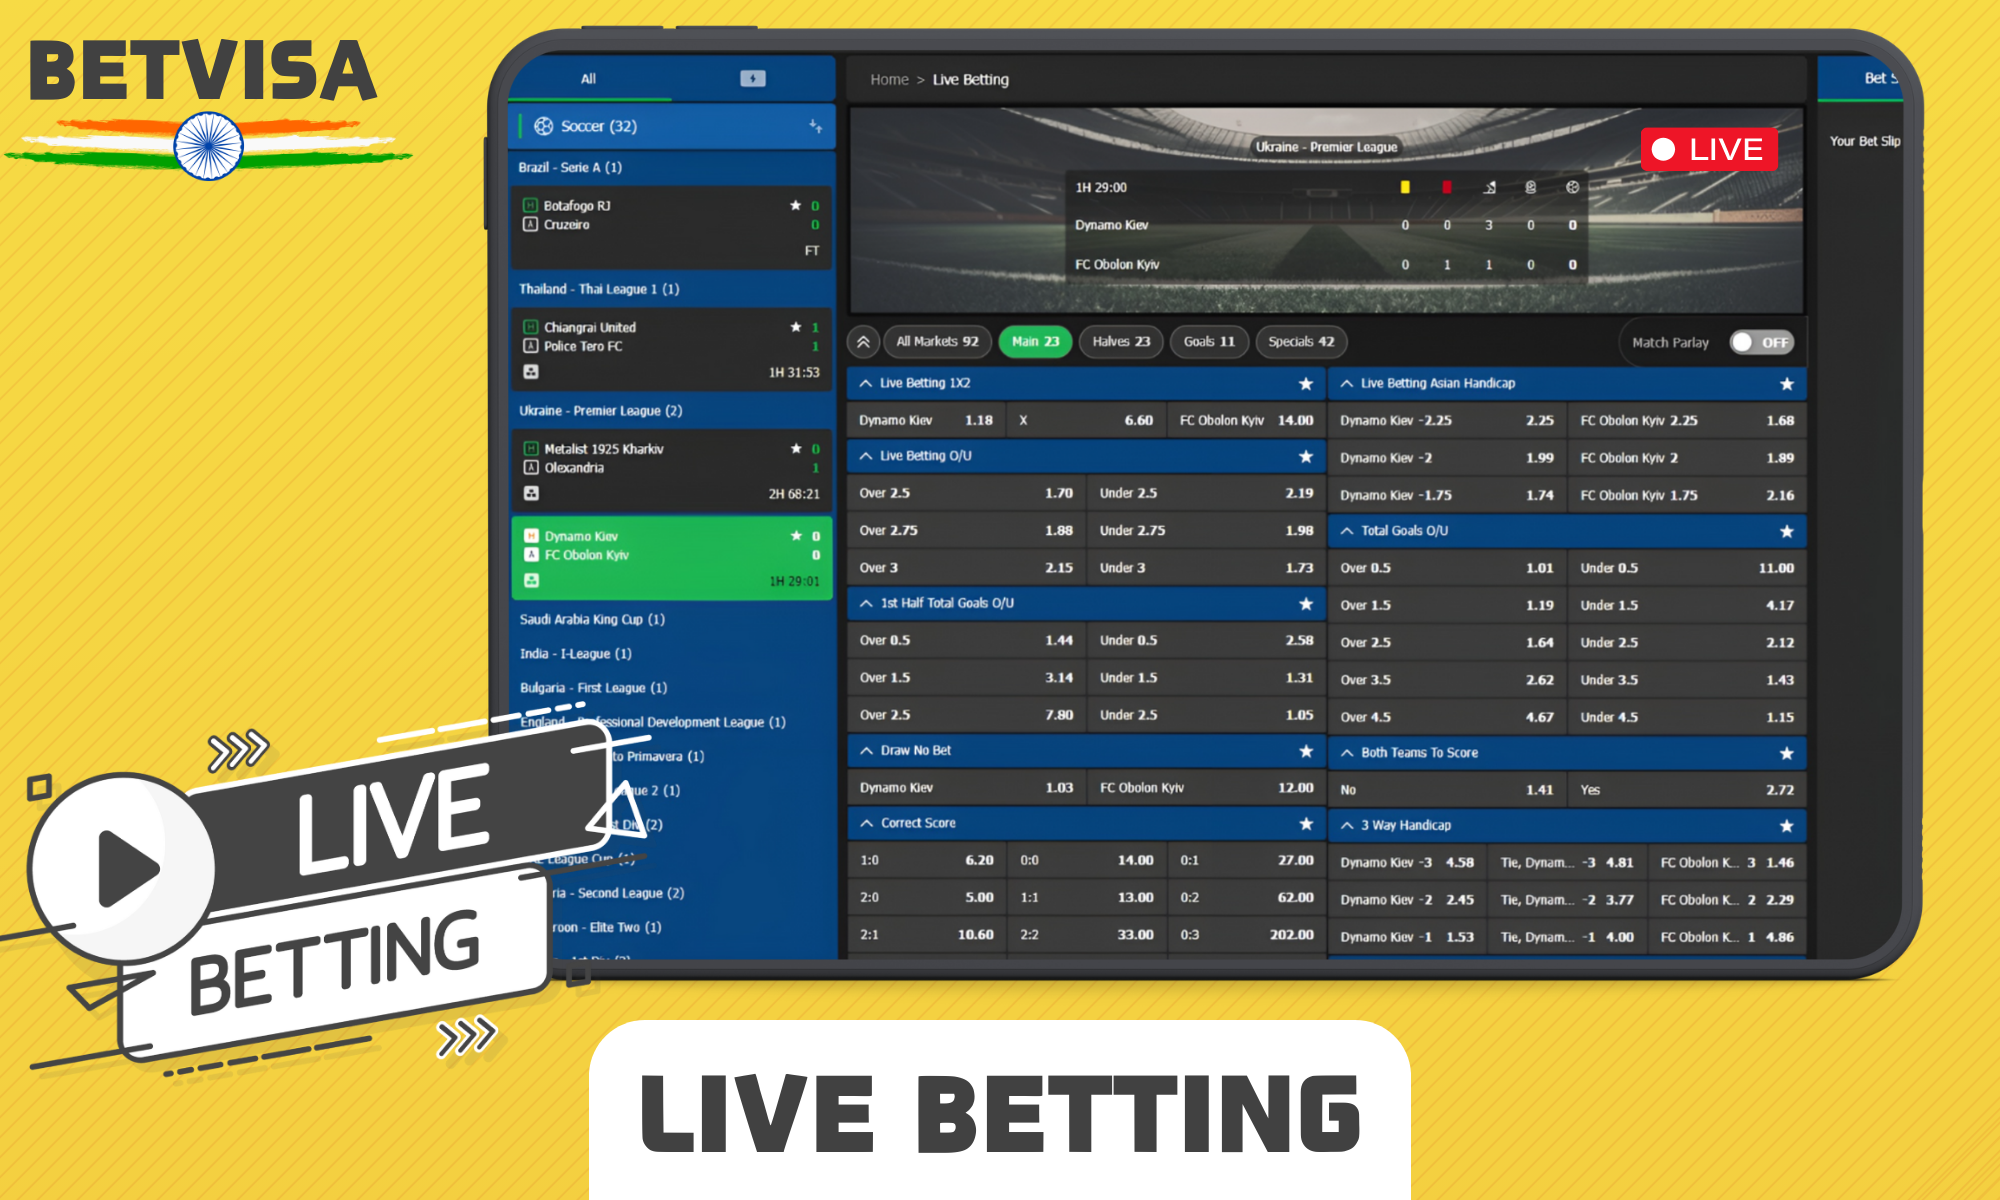 Betvisa you can place bets directly during a sports or eSports match